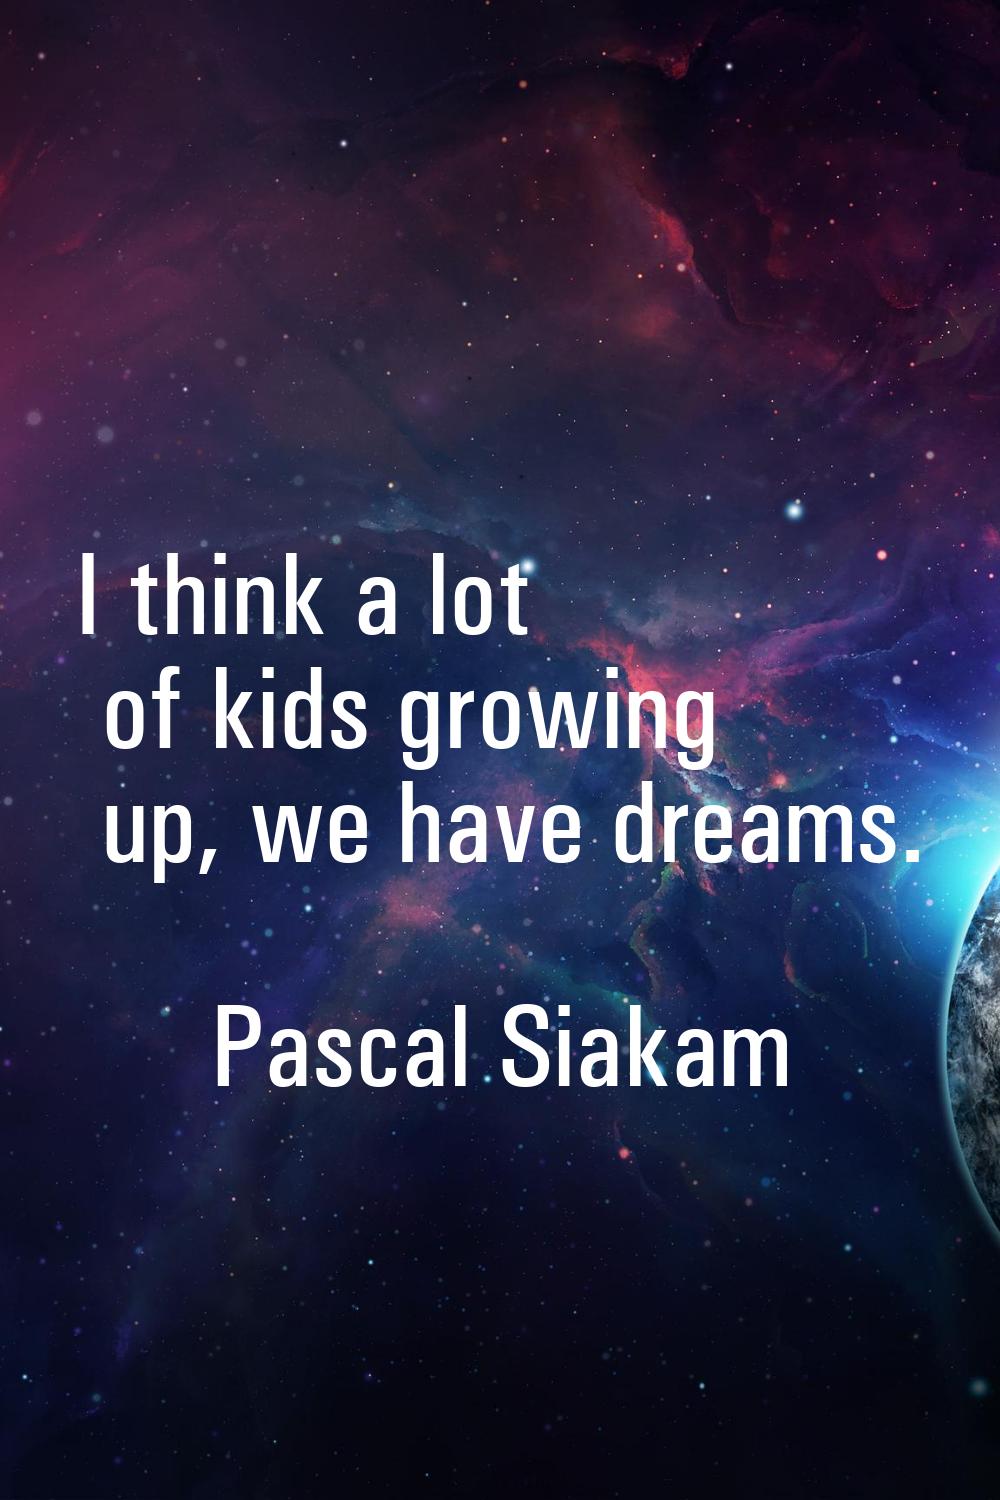 I think a lot of kids growing up, we have dreams.